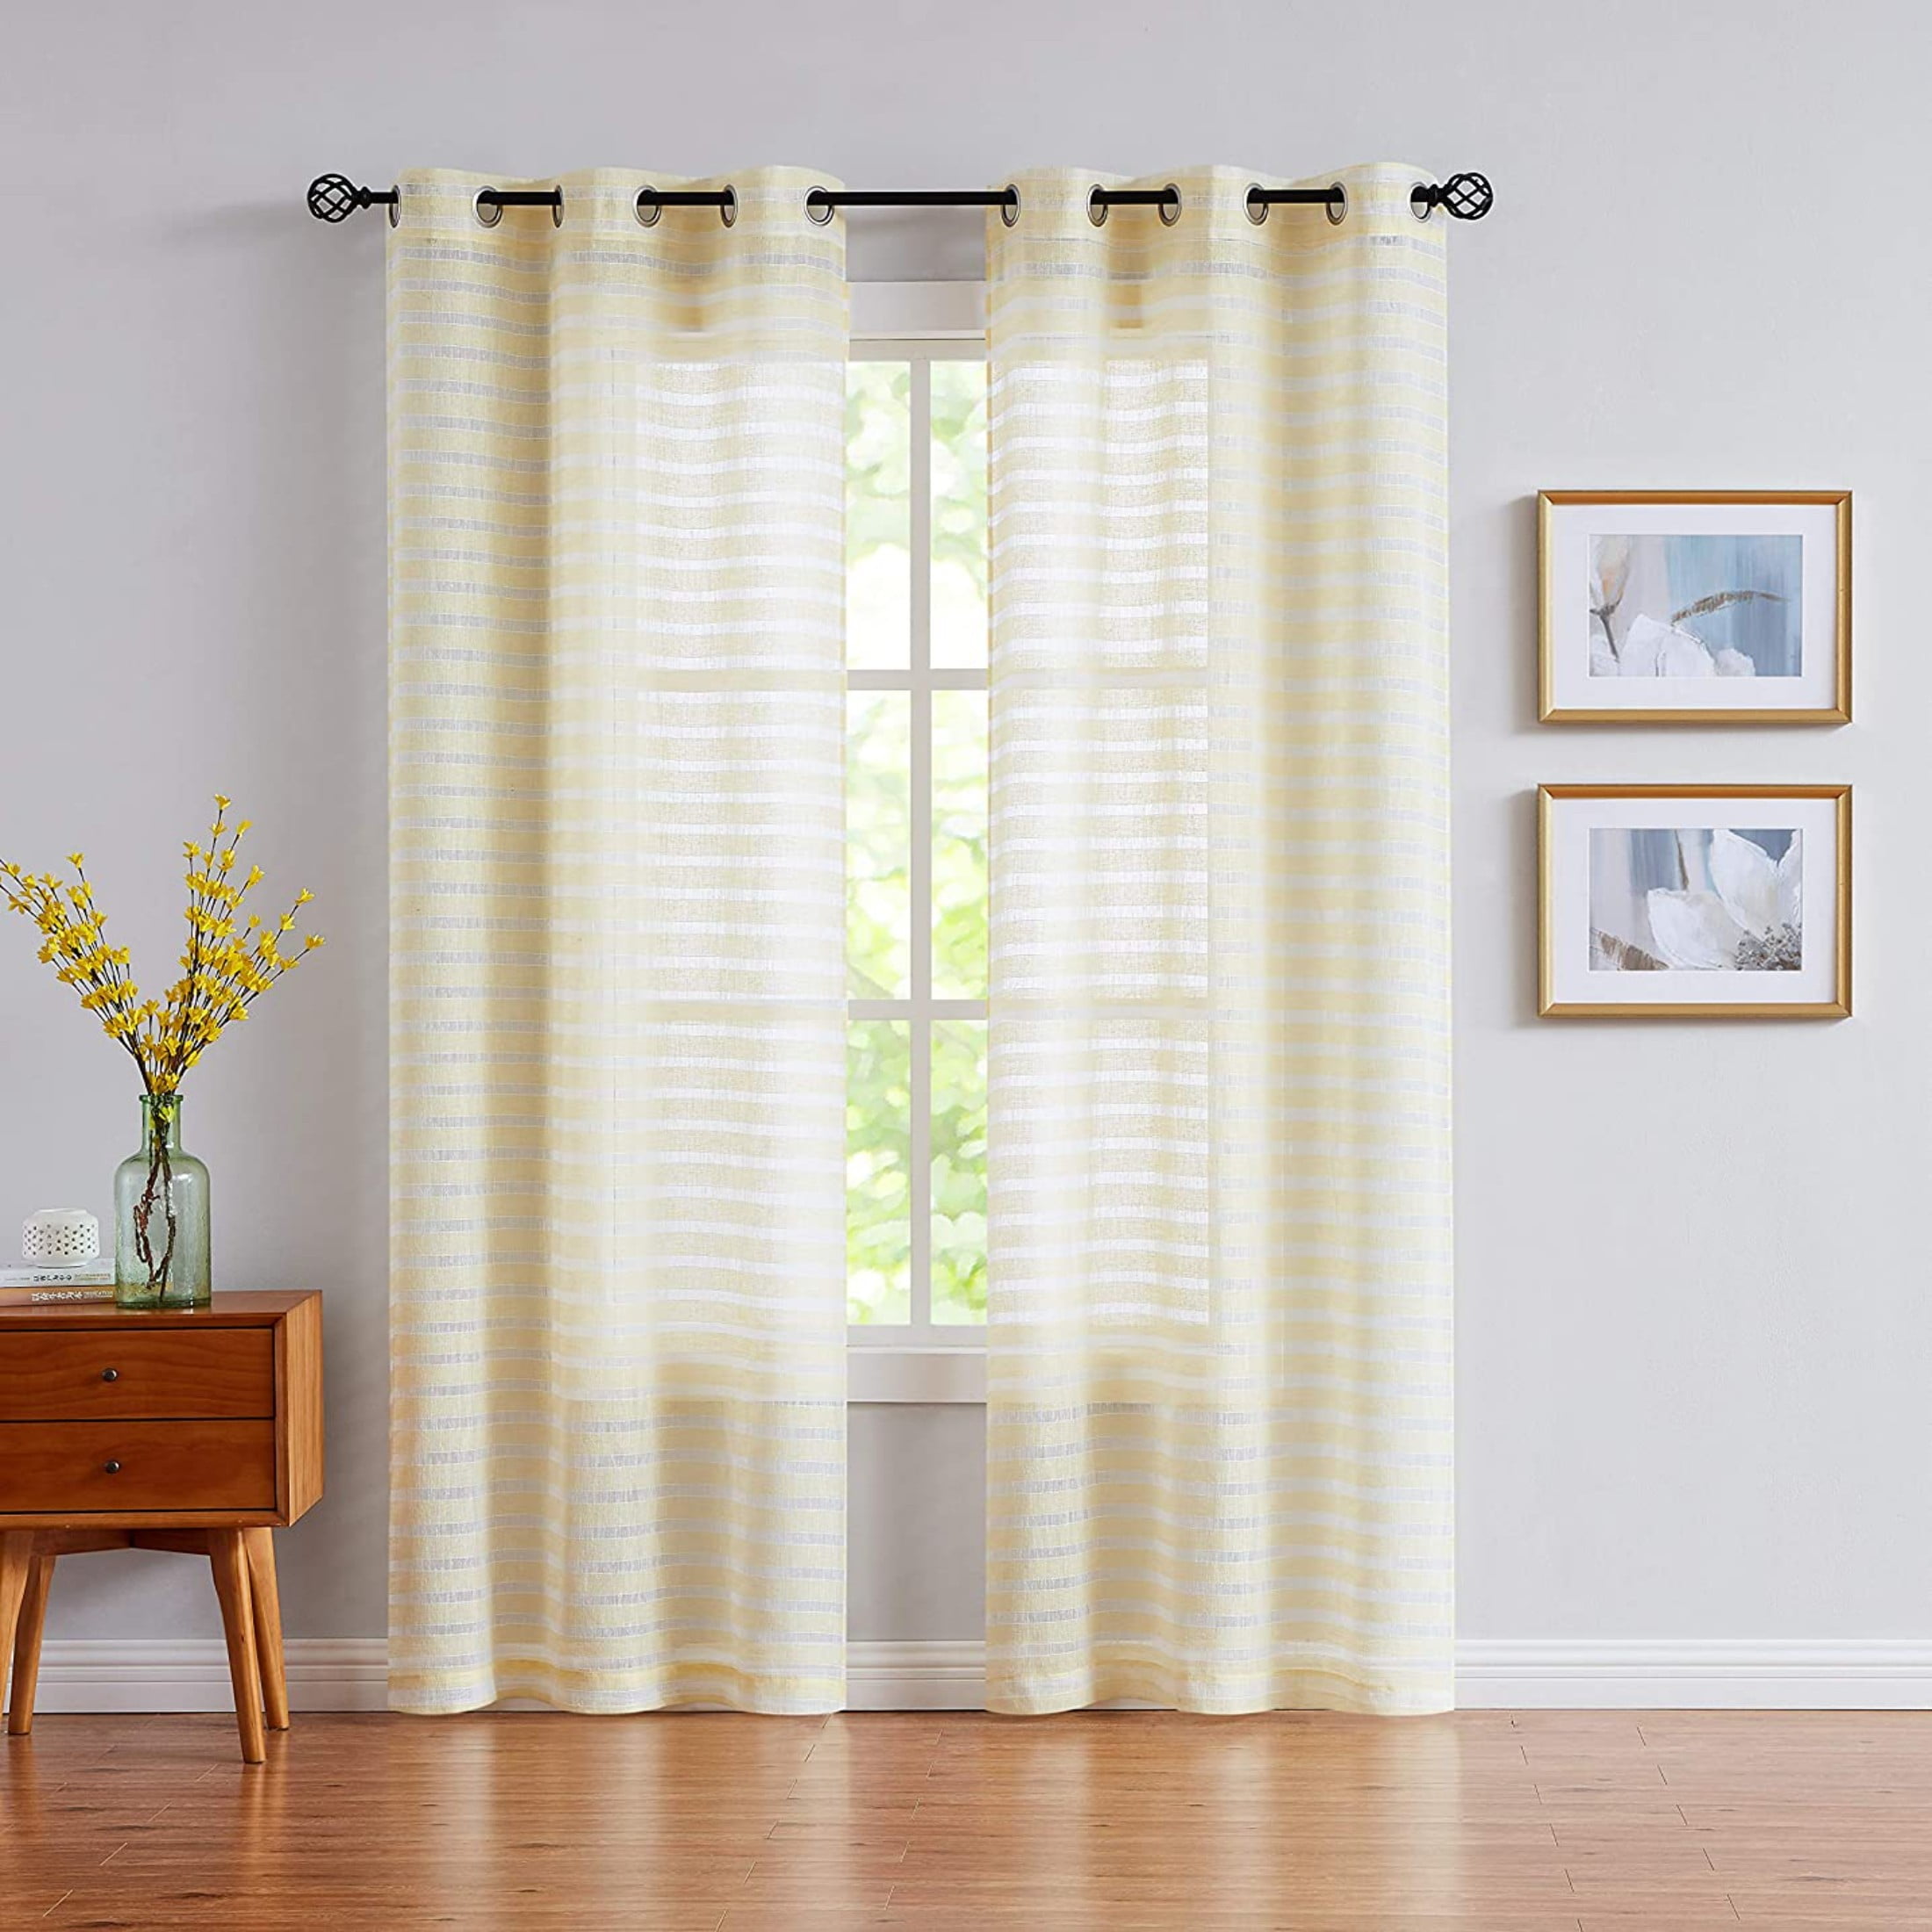 Fragrantex yellow and White Sheer Curtains Linen Horizontal Stripe  Filtering window Curtain for Living Room 40